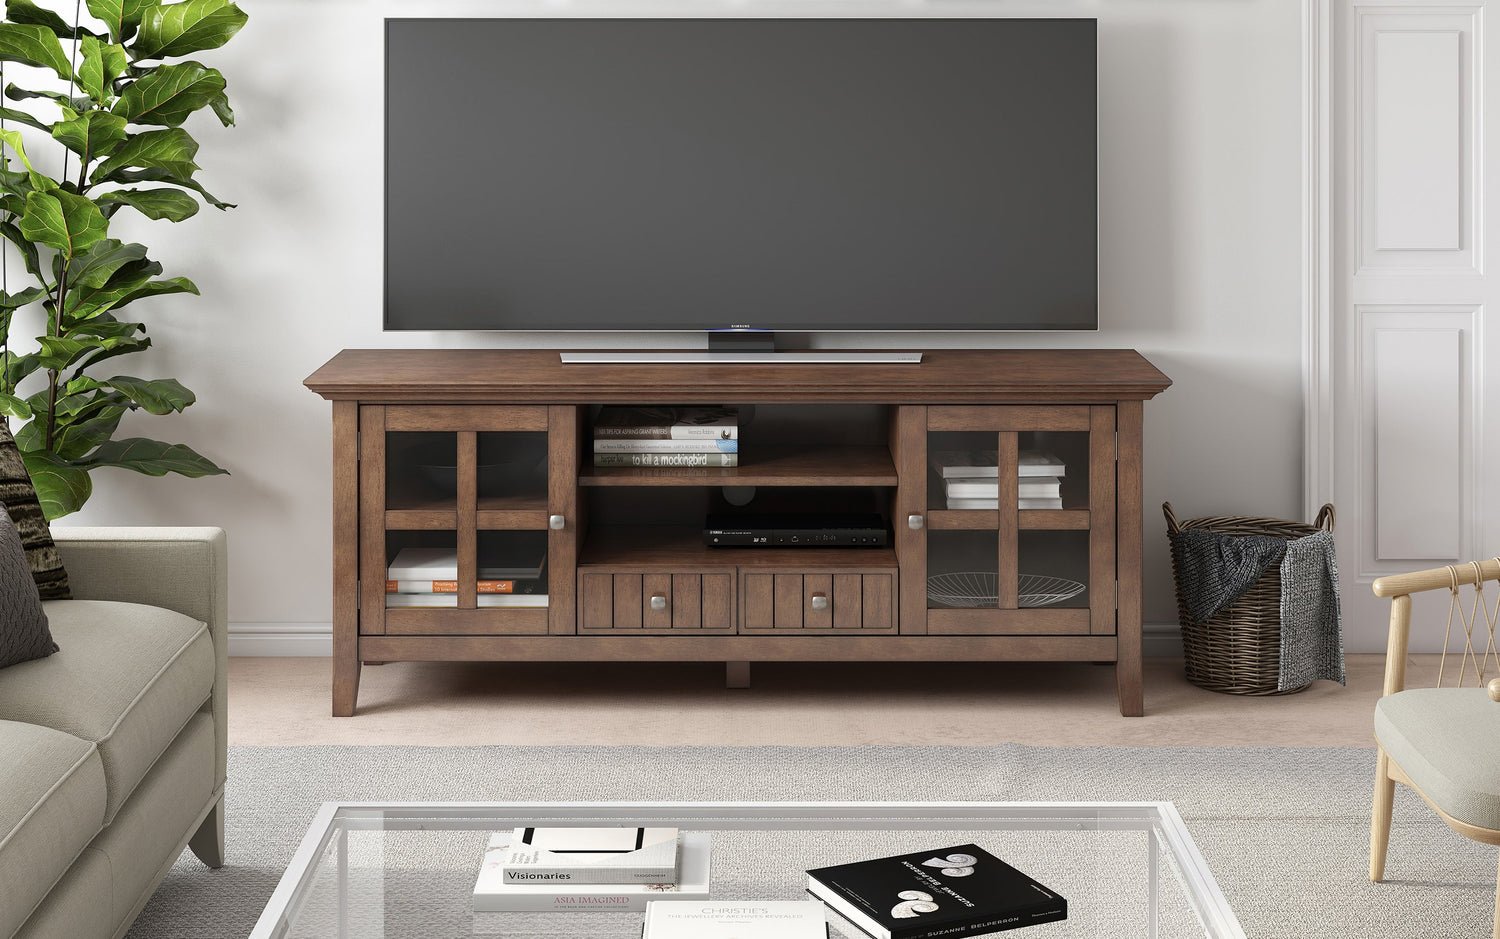 55 Traditional Natural Wood TV Stand for TVs up to 60 with Drawer White  Oak - Home Essentials